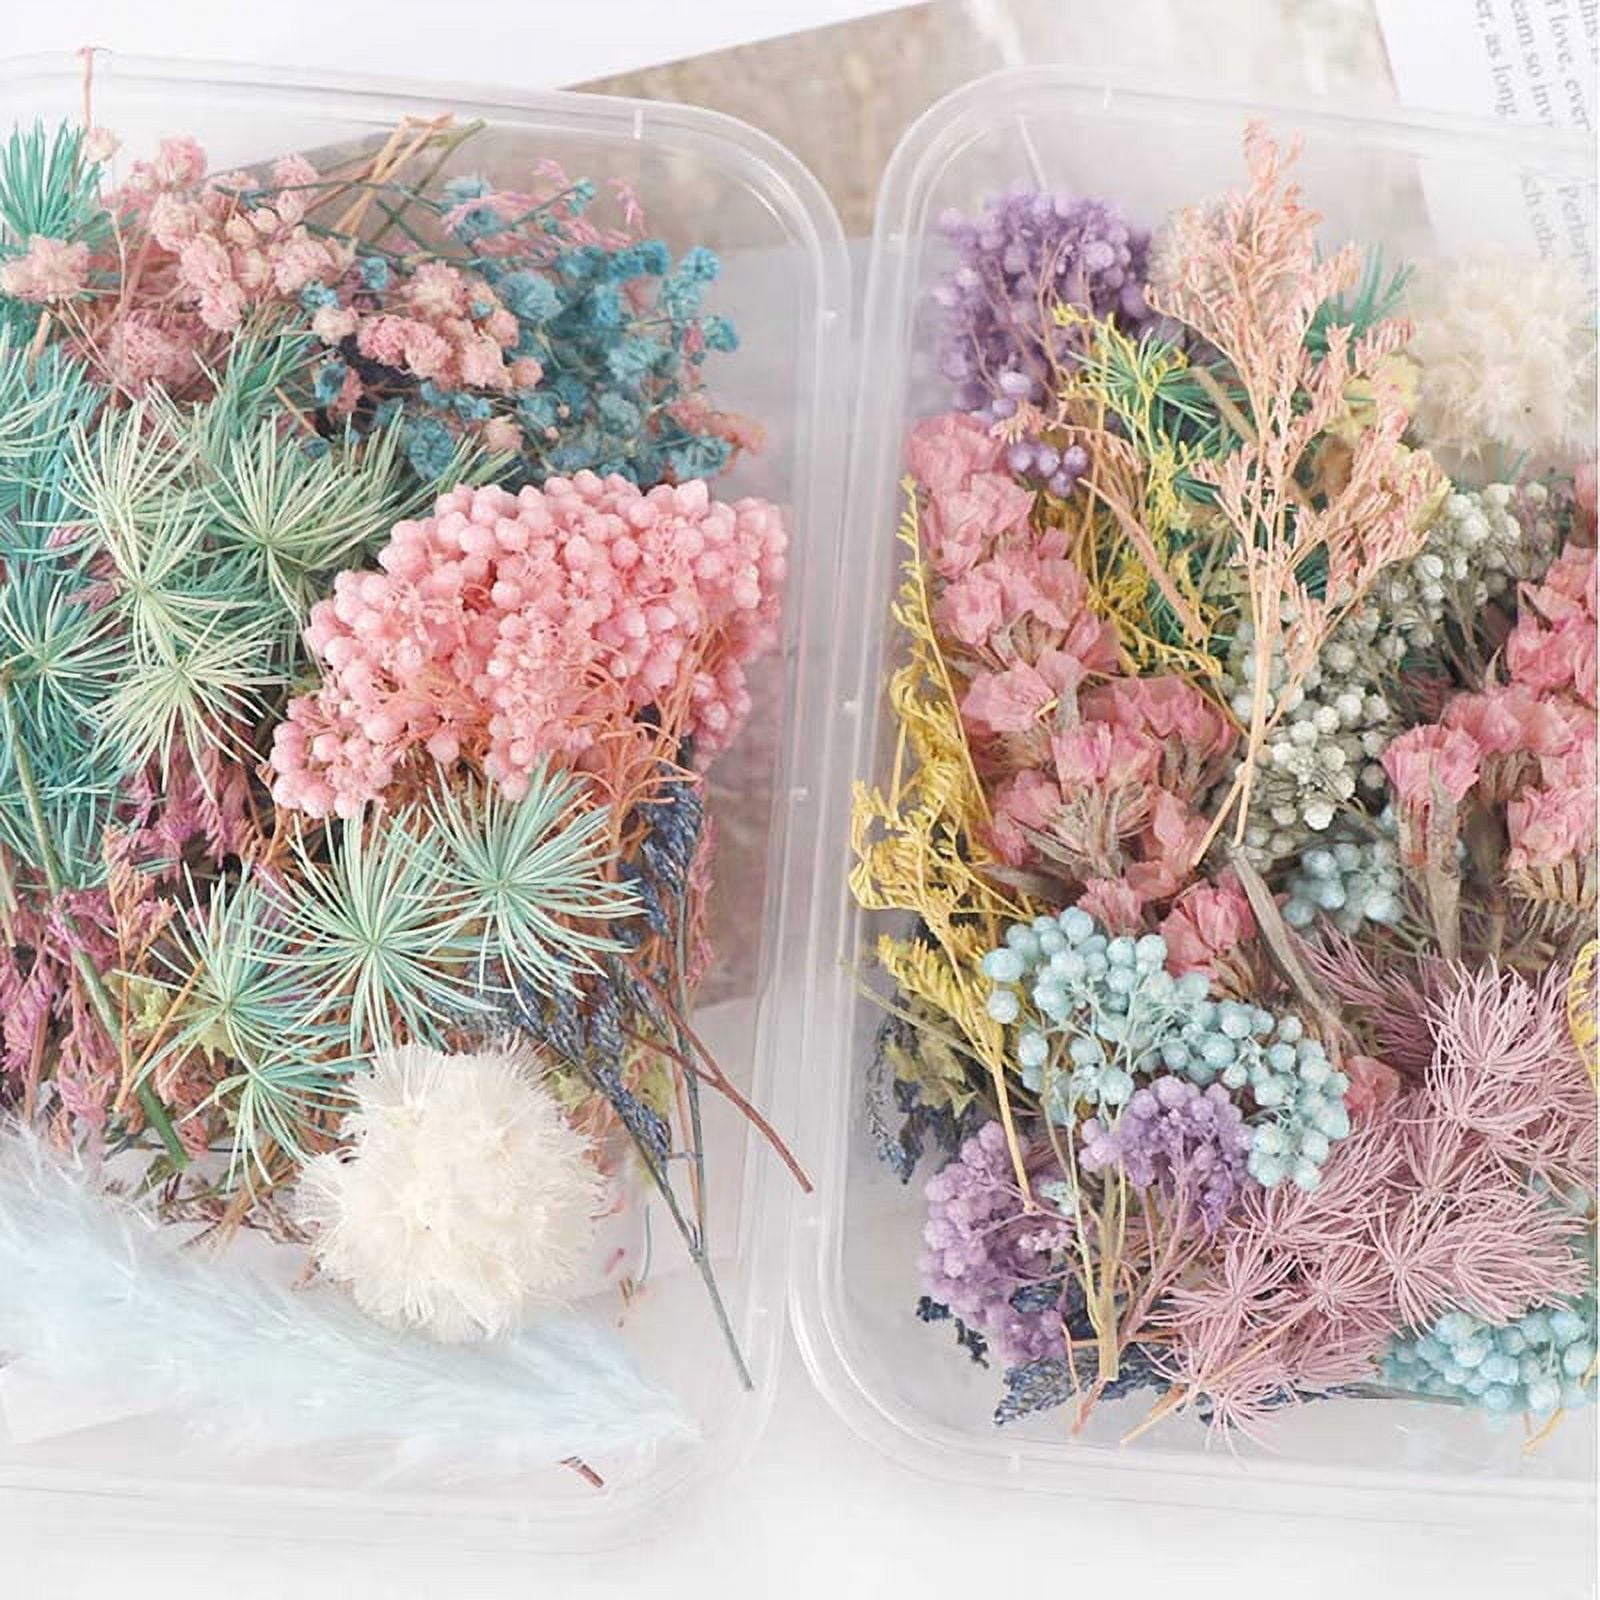 Real Flowers Resin Jewelry, Dried Flowers Resin Crafts